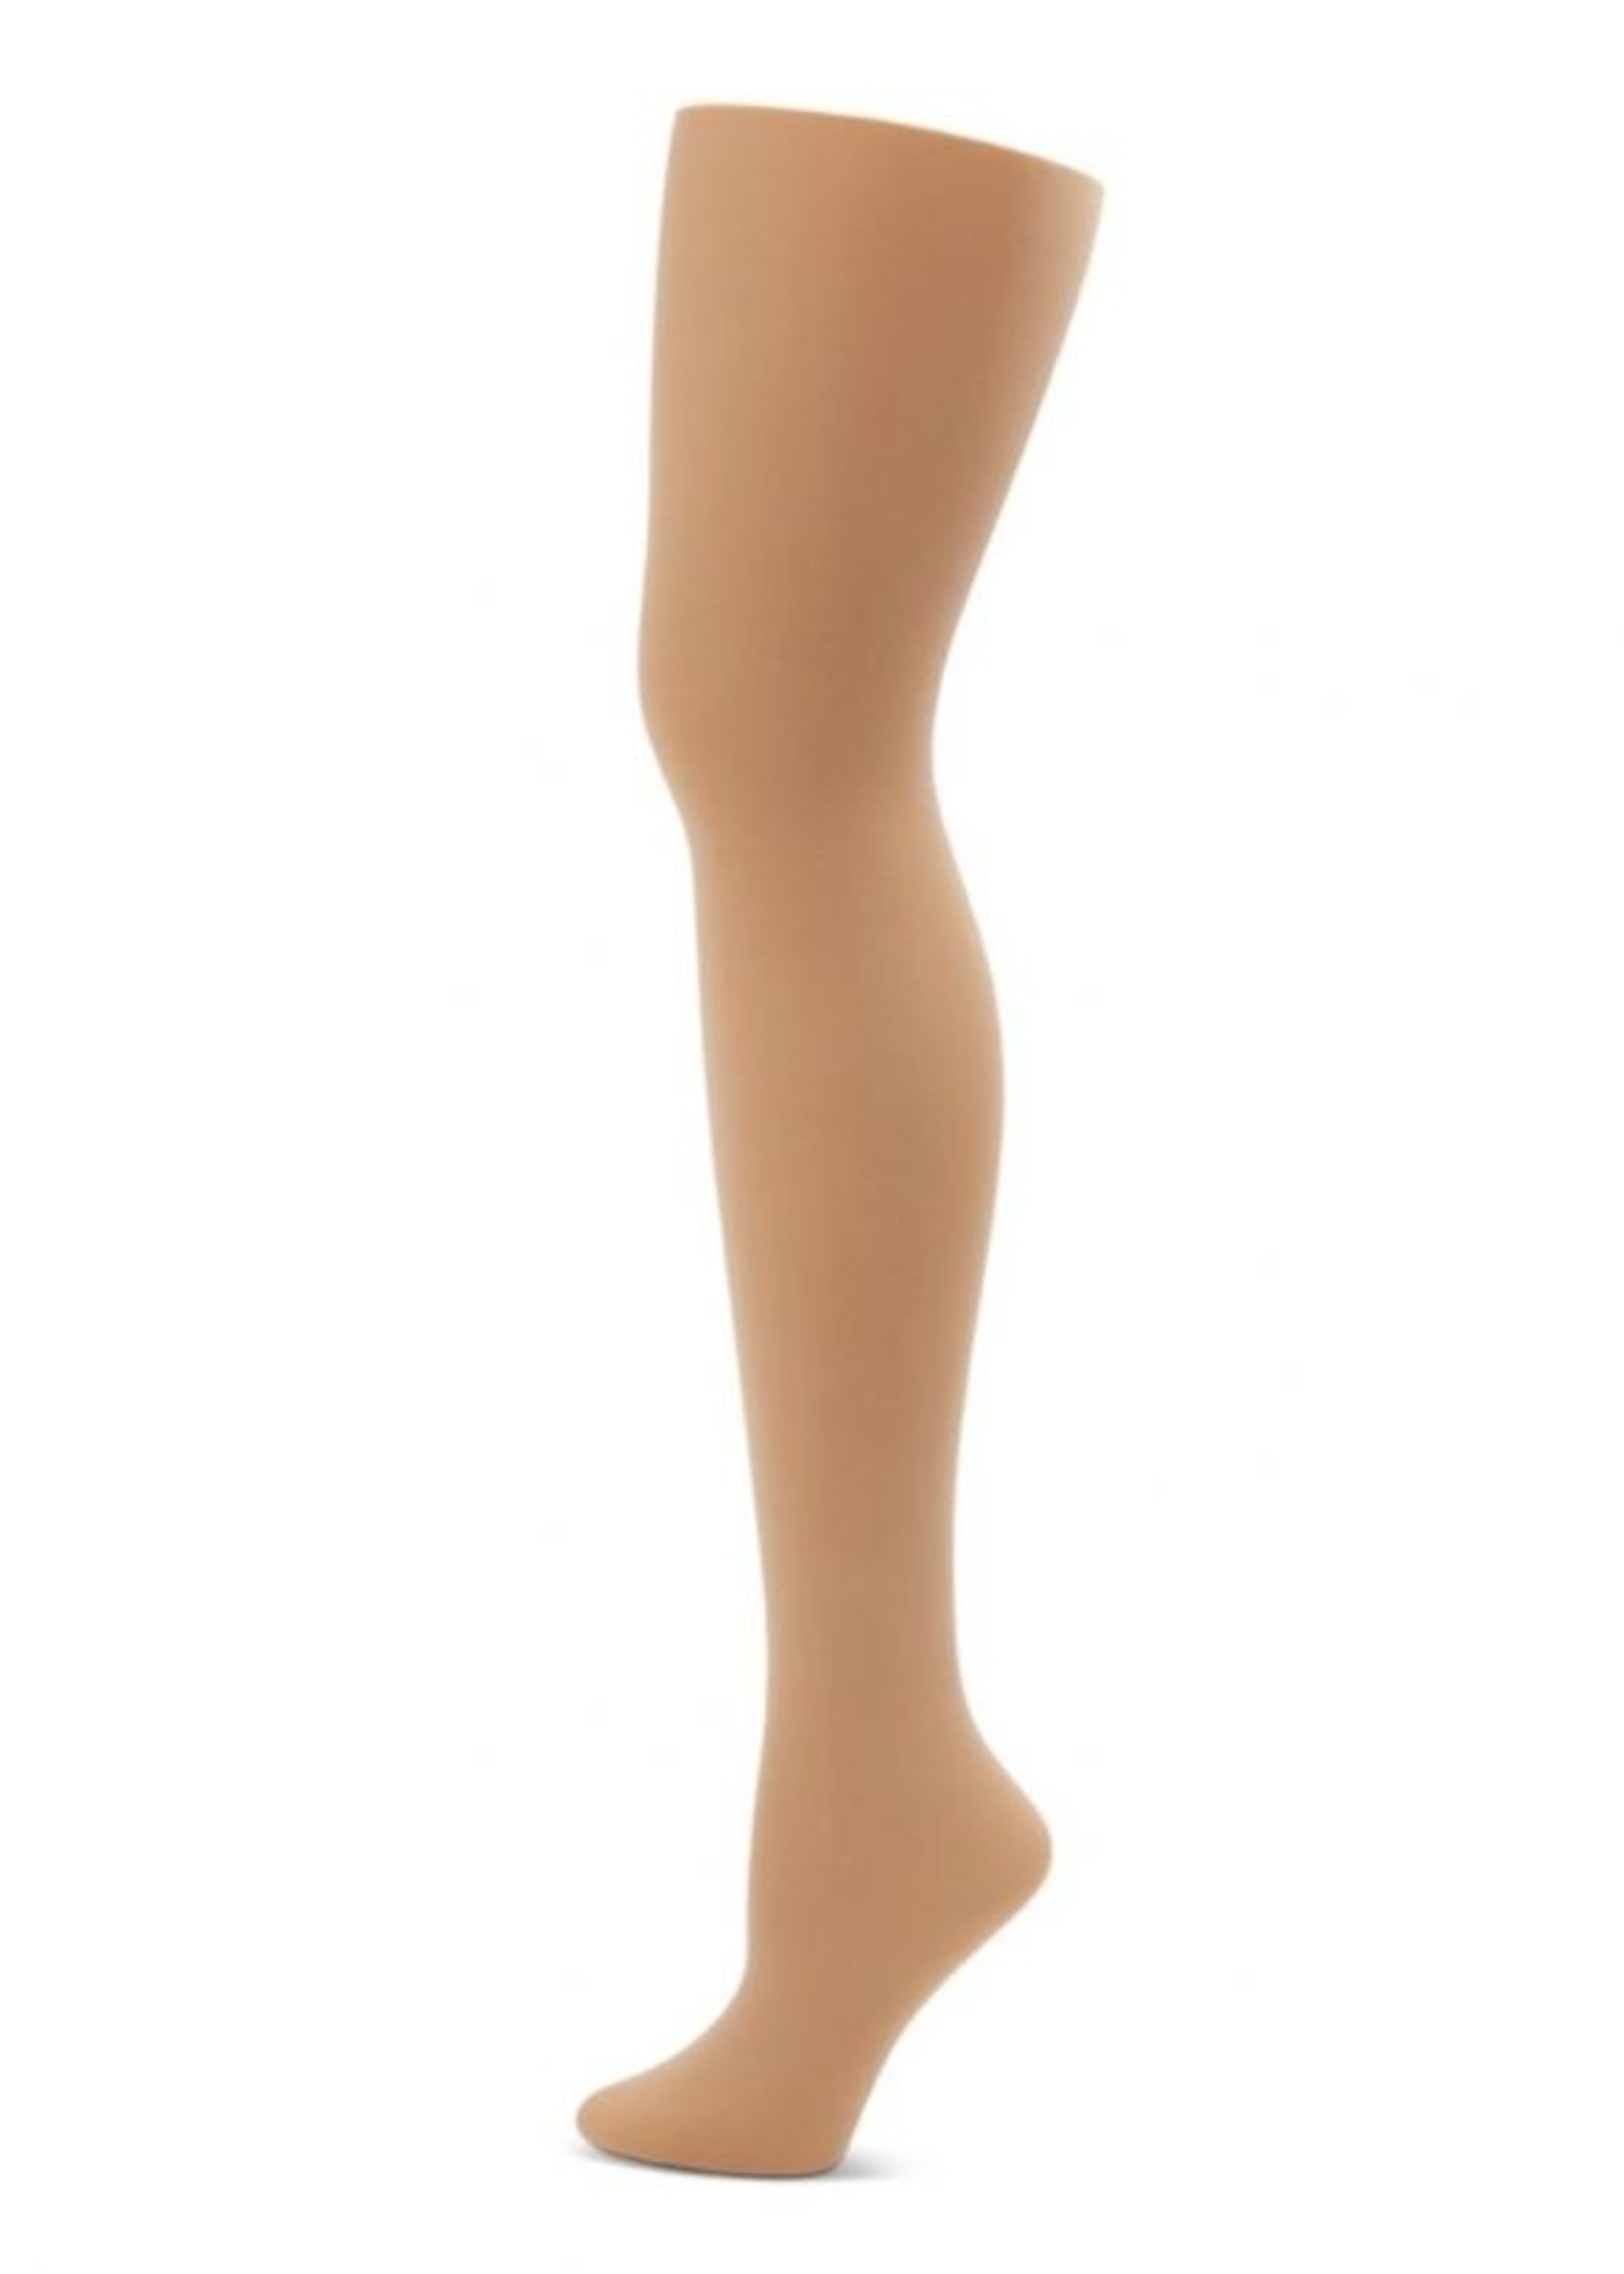 Bunheads 1825C - Children's Footed Tights